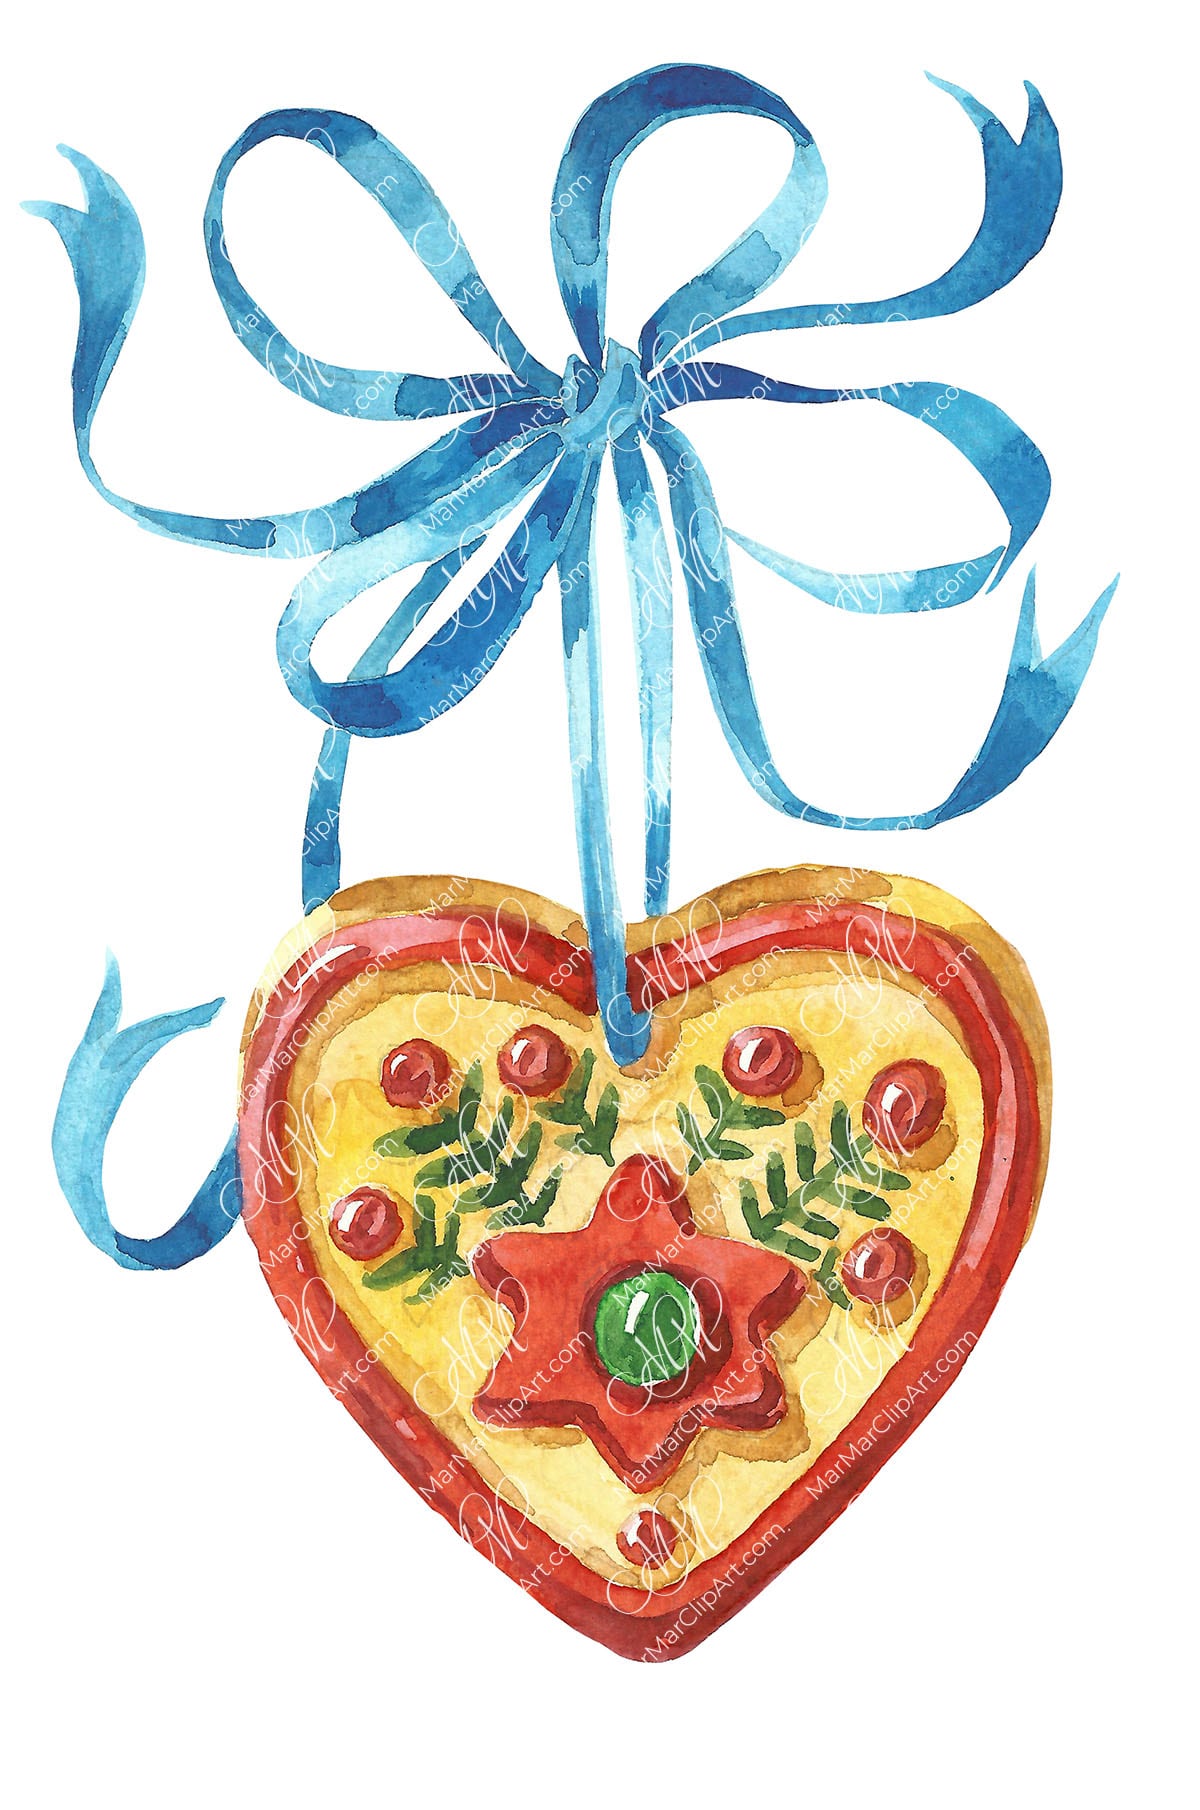 Christmas Heart Gingerbread. Watercolor hand made illustration, can be used for your cards, invitations, for your design work